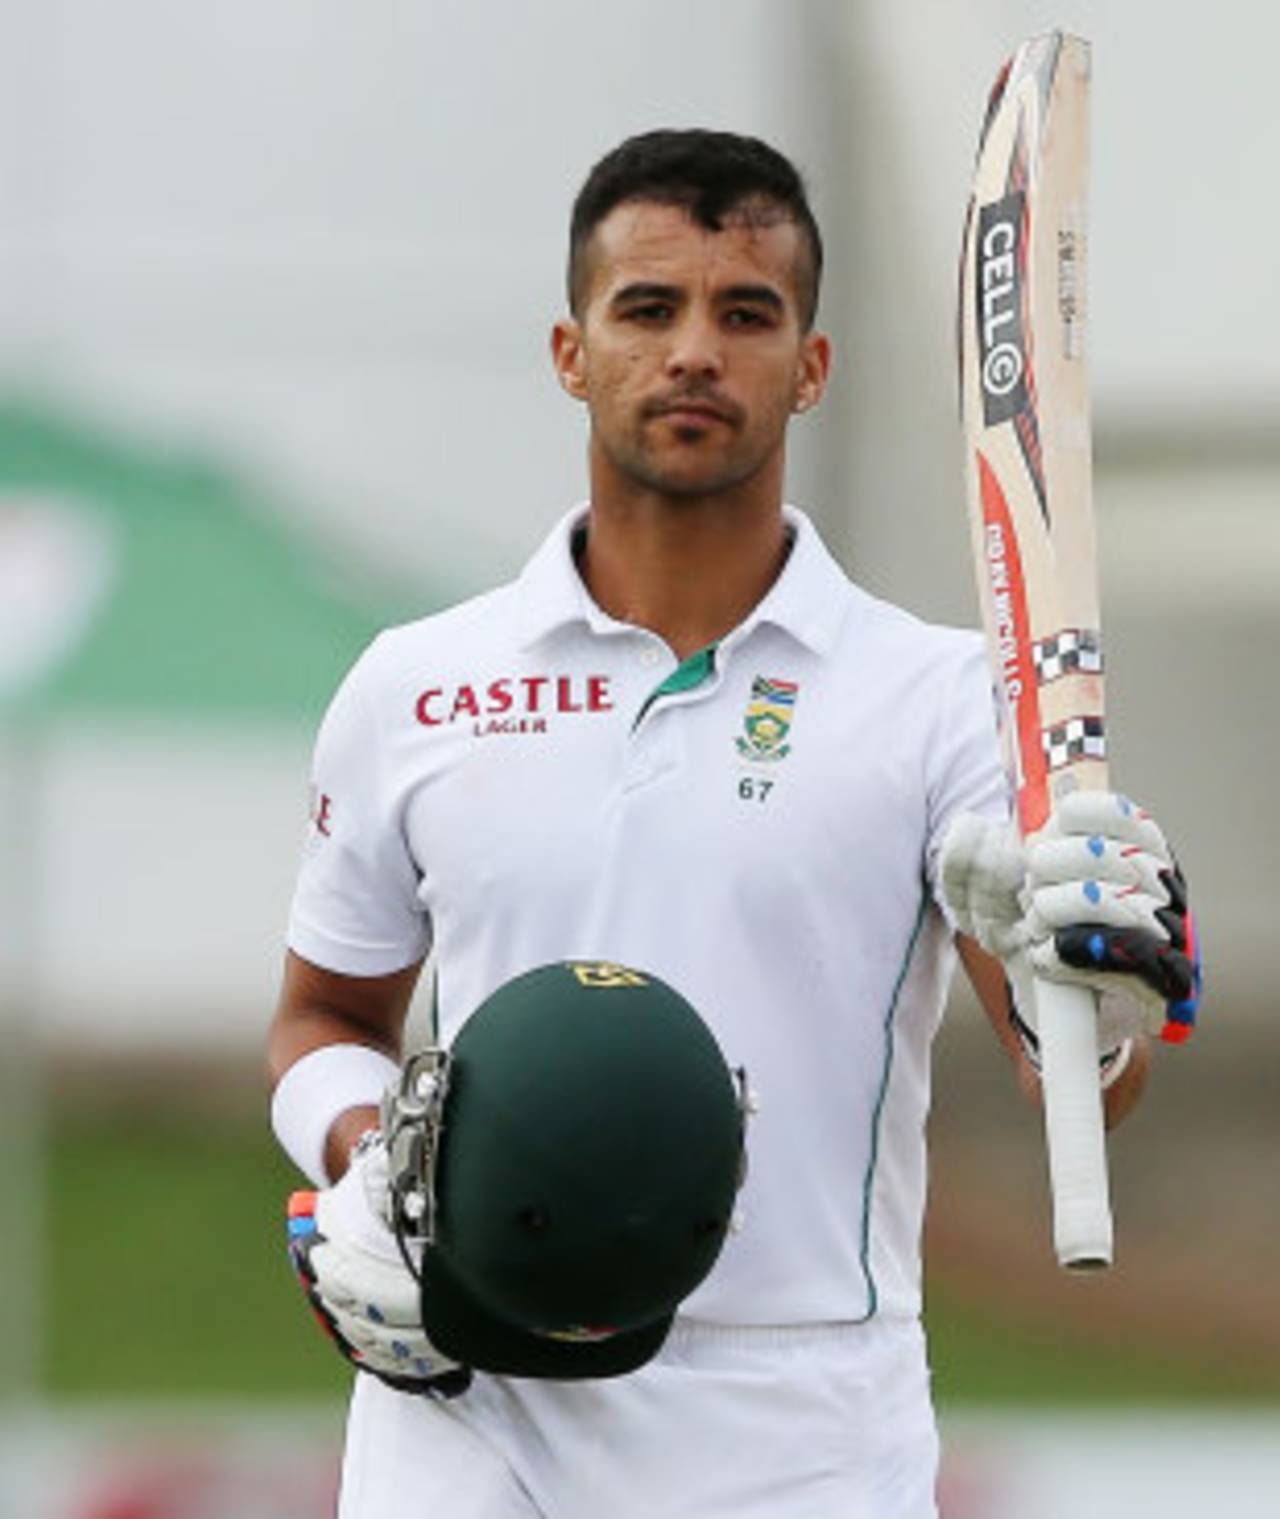 JP Duminy raises his bat to the crowd after reaching his century, South Africa v Australia, 2nd Test, Port Elizabeth, 2nd day, February 21, 2014